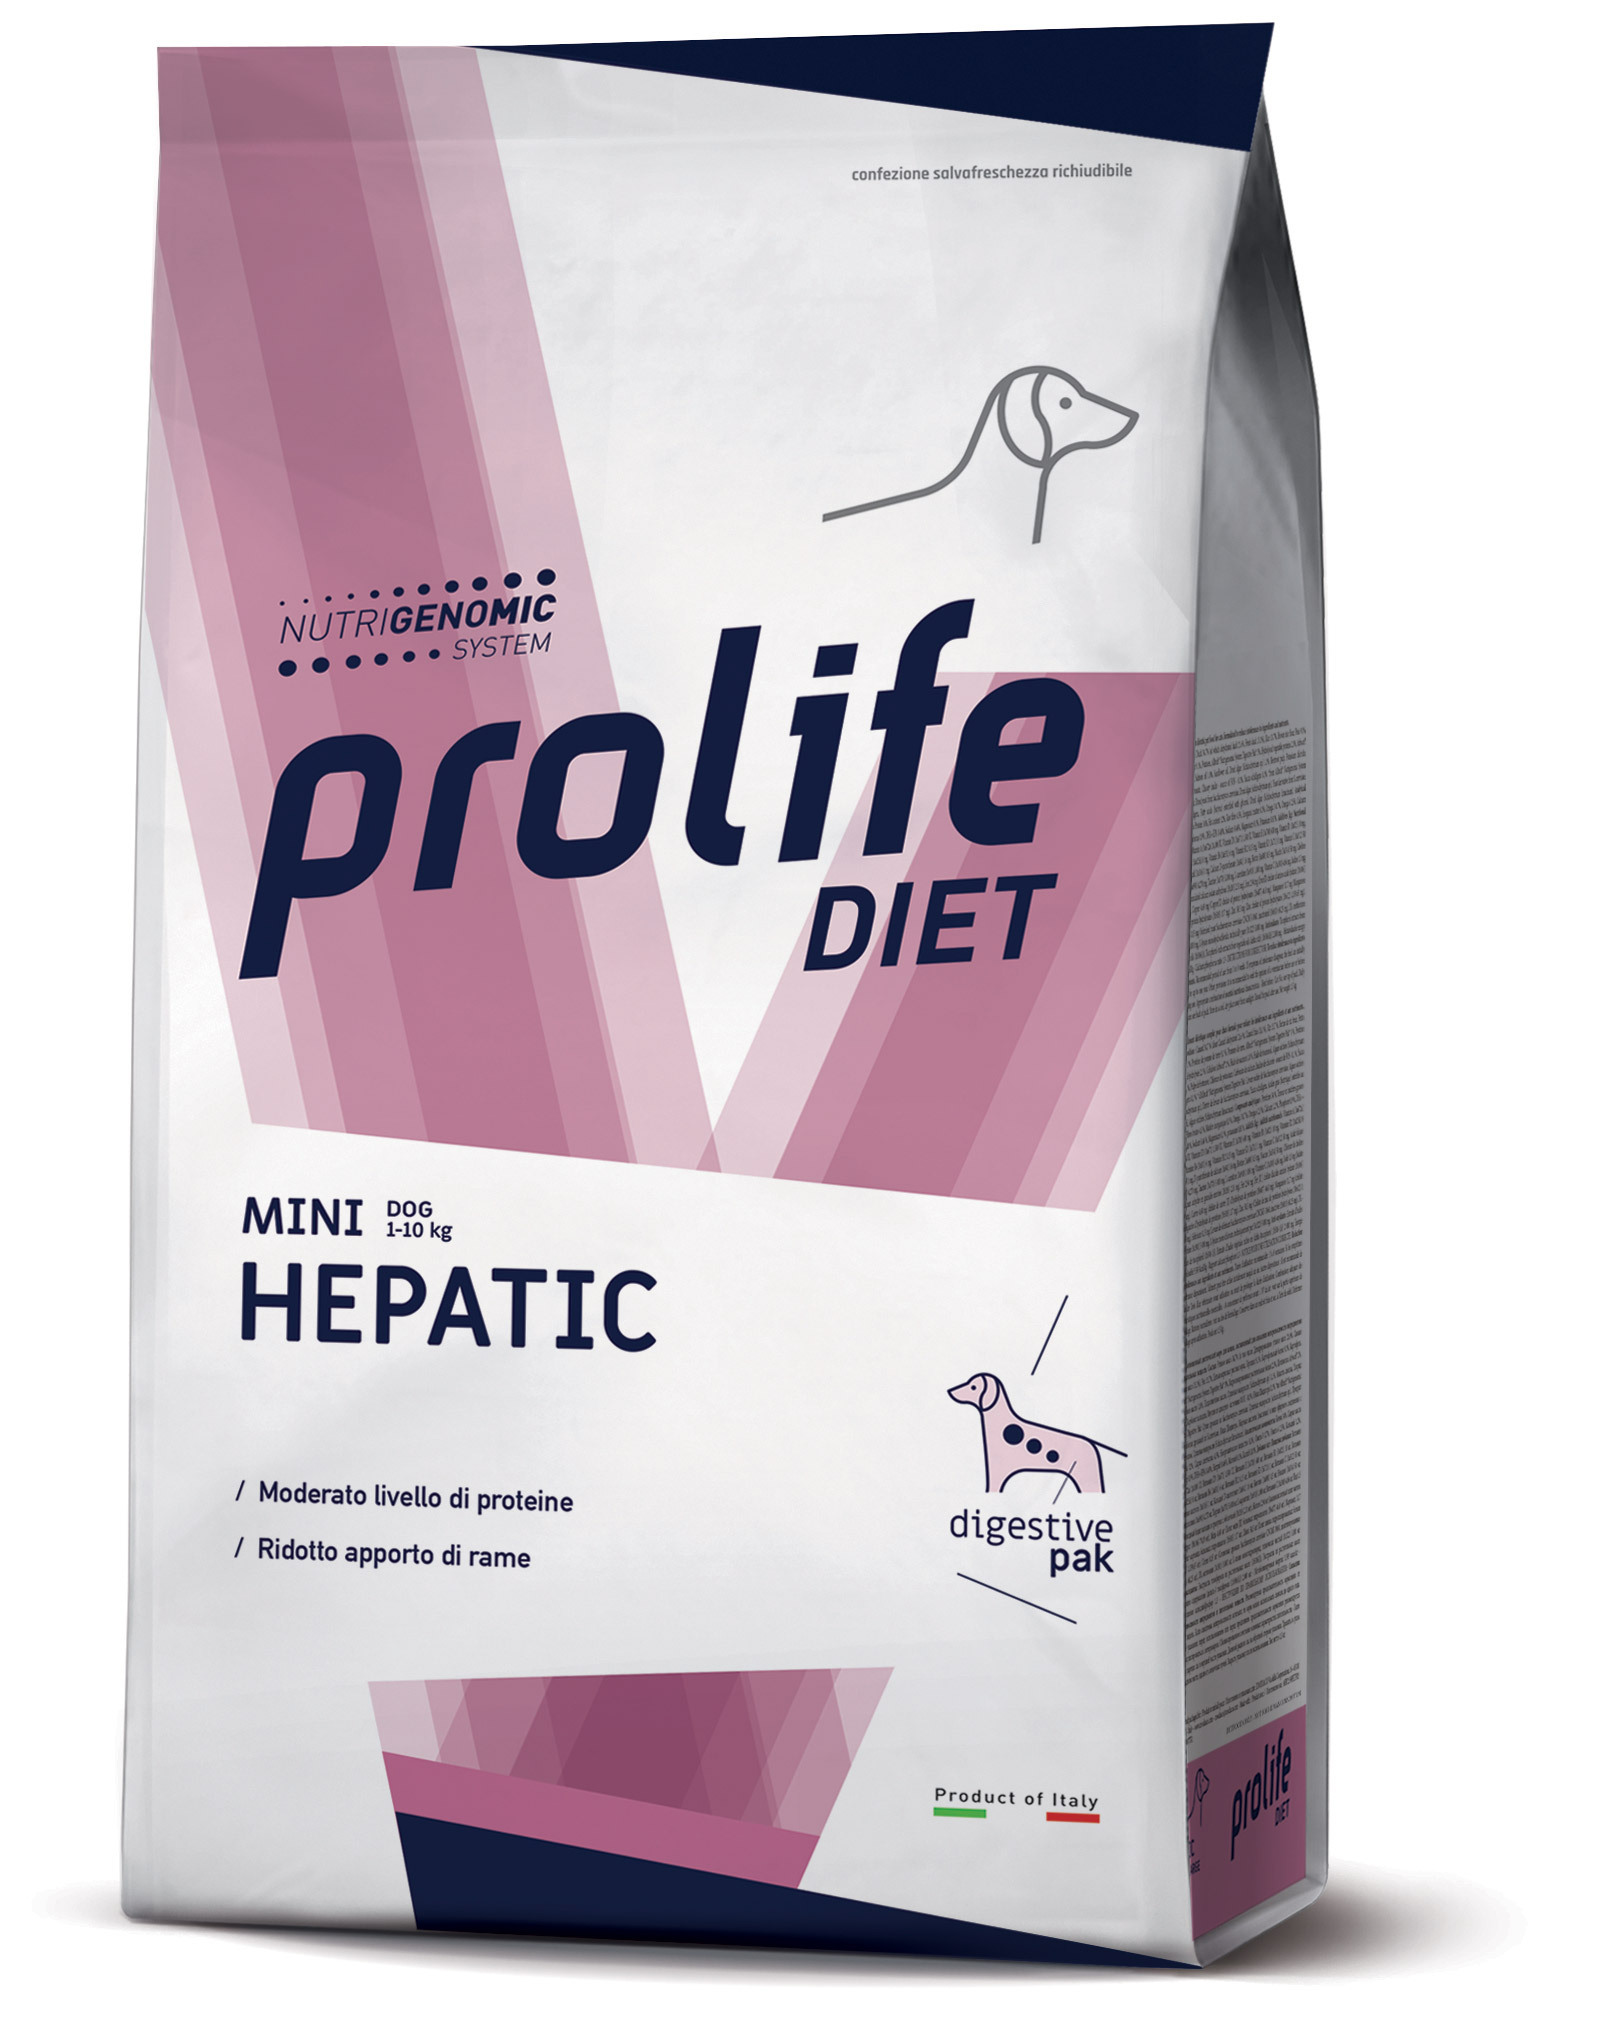 Complete dietetic pet food for medium and large adult dogs, formulated to support liver function in cases of chronic liver insufficiency.
